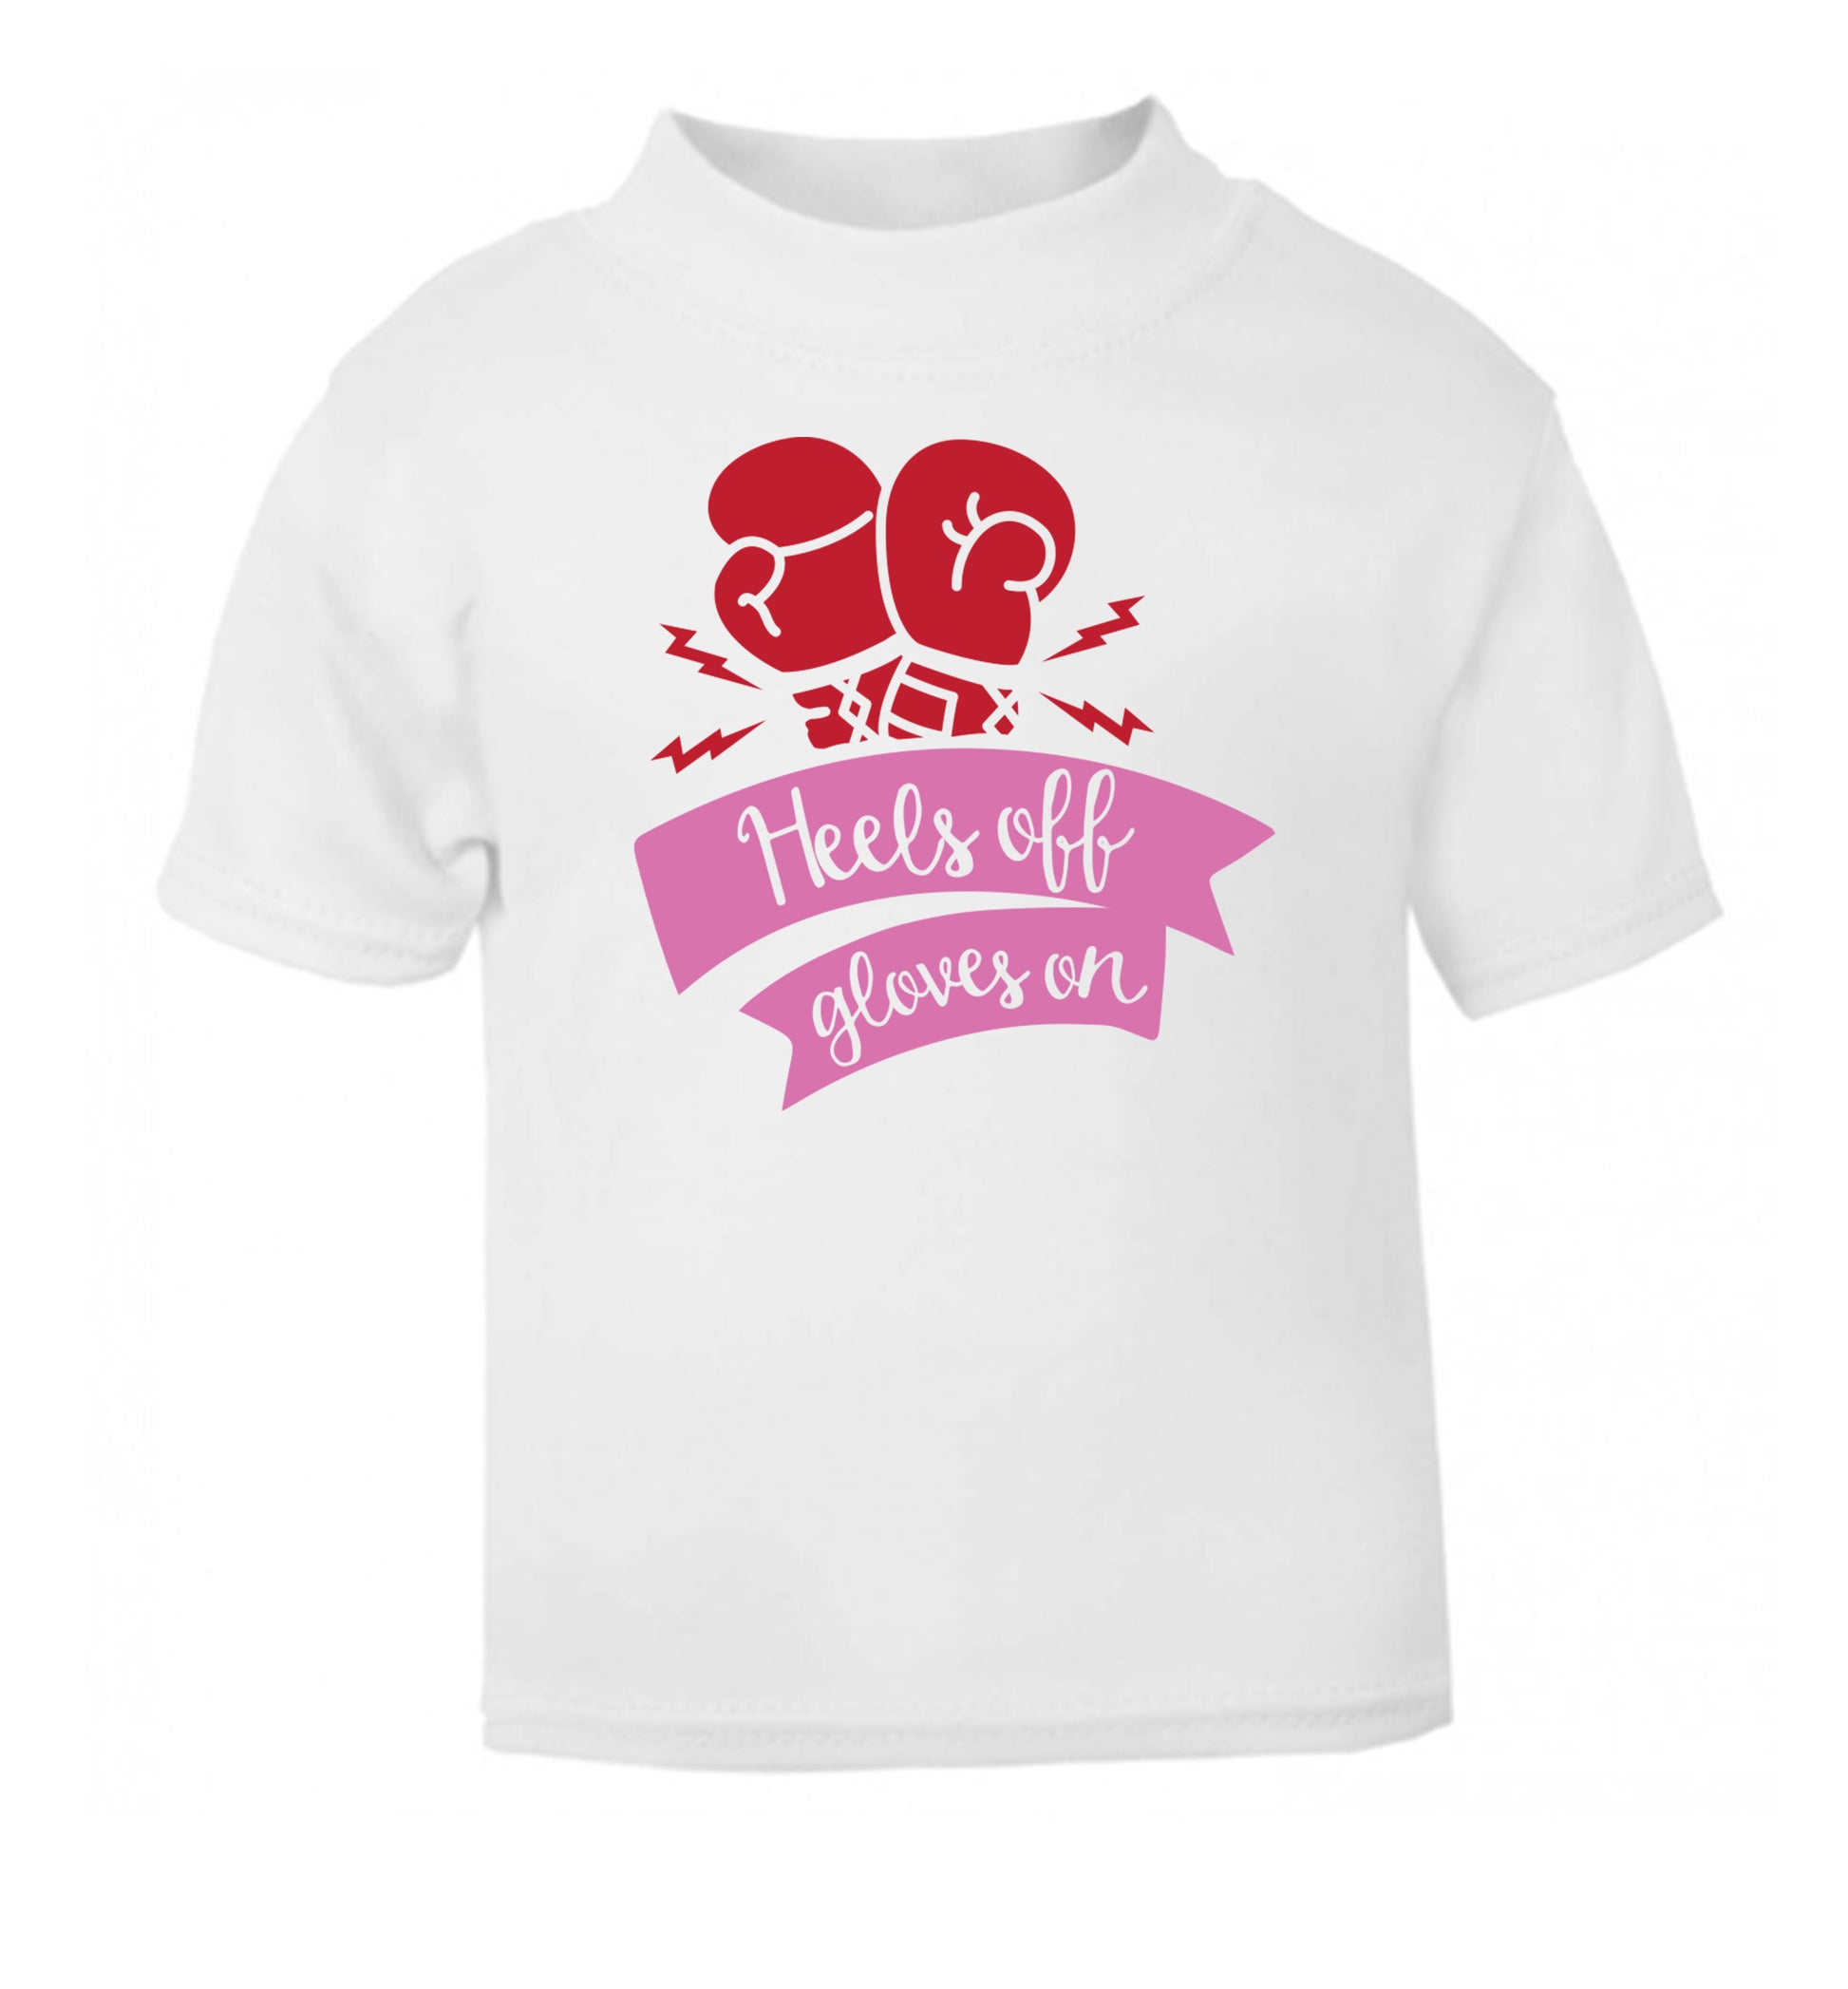 Heels off gloves on white Baby Toddler Tshirt 2 Years